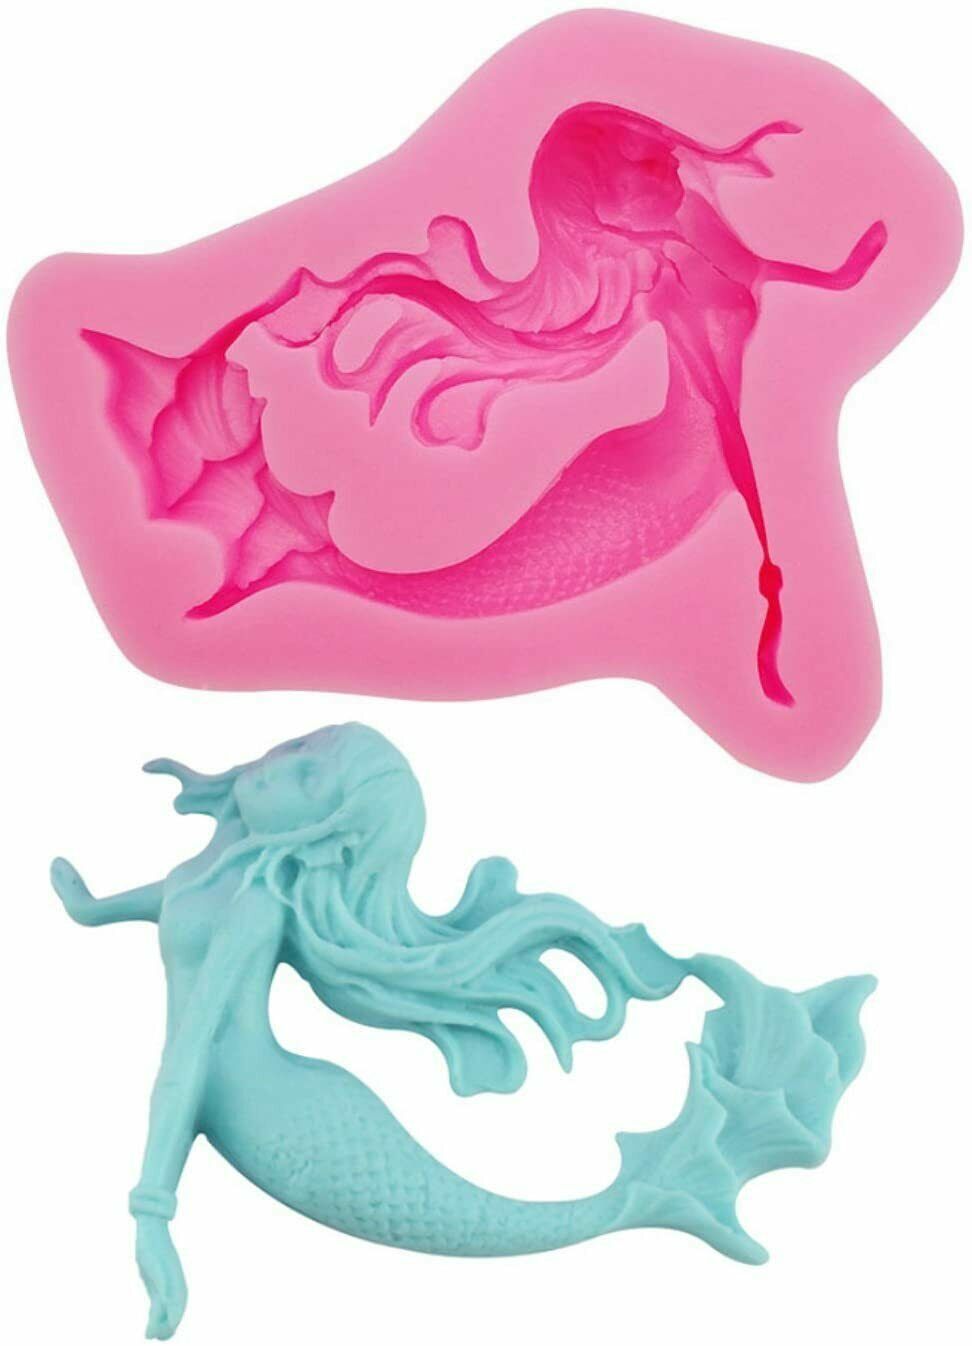 attachment-https://www.cupcakeaddicts.co.uk/wp-content/uploads/imported/3/Mermaid-Silicone-Mould-Fairy-Cup-Cake-Icing-Baking-Decorating-Birthday-Toppers-323163245923.jpg